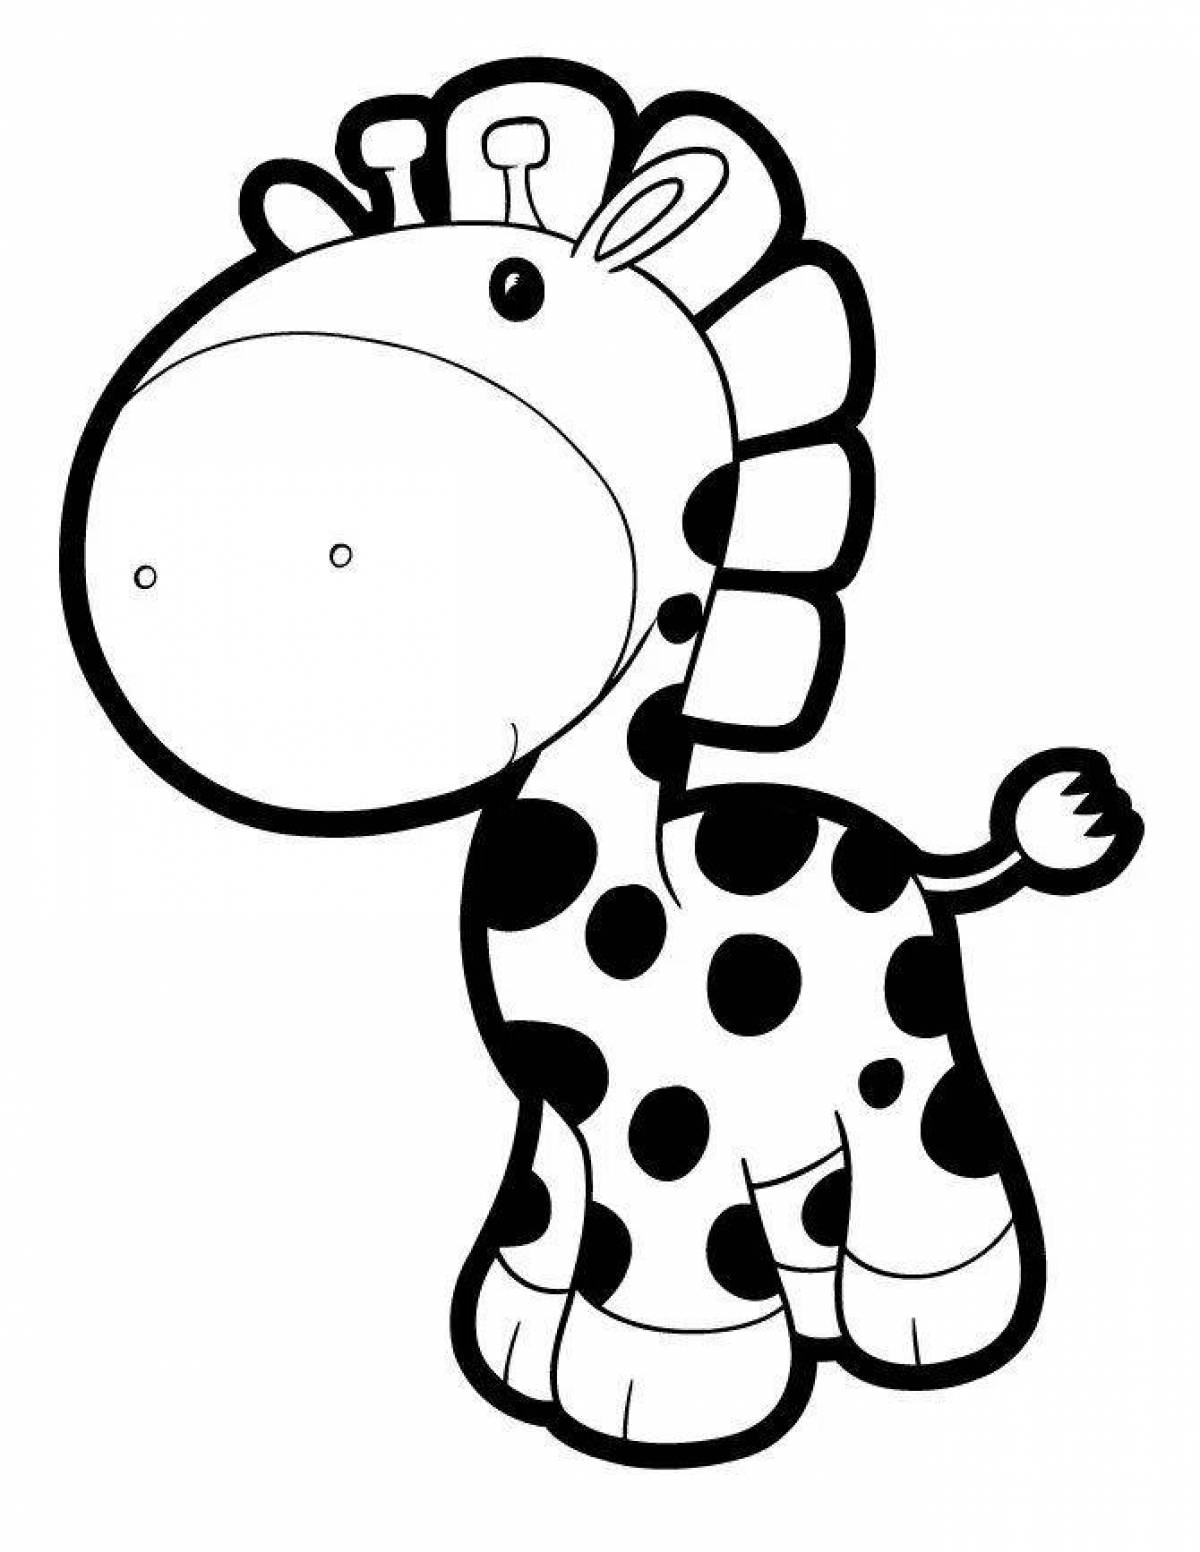 Outstanding giraffe coloring page